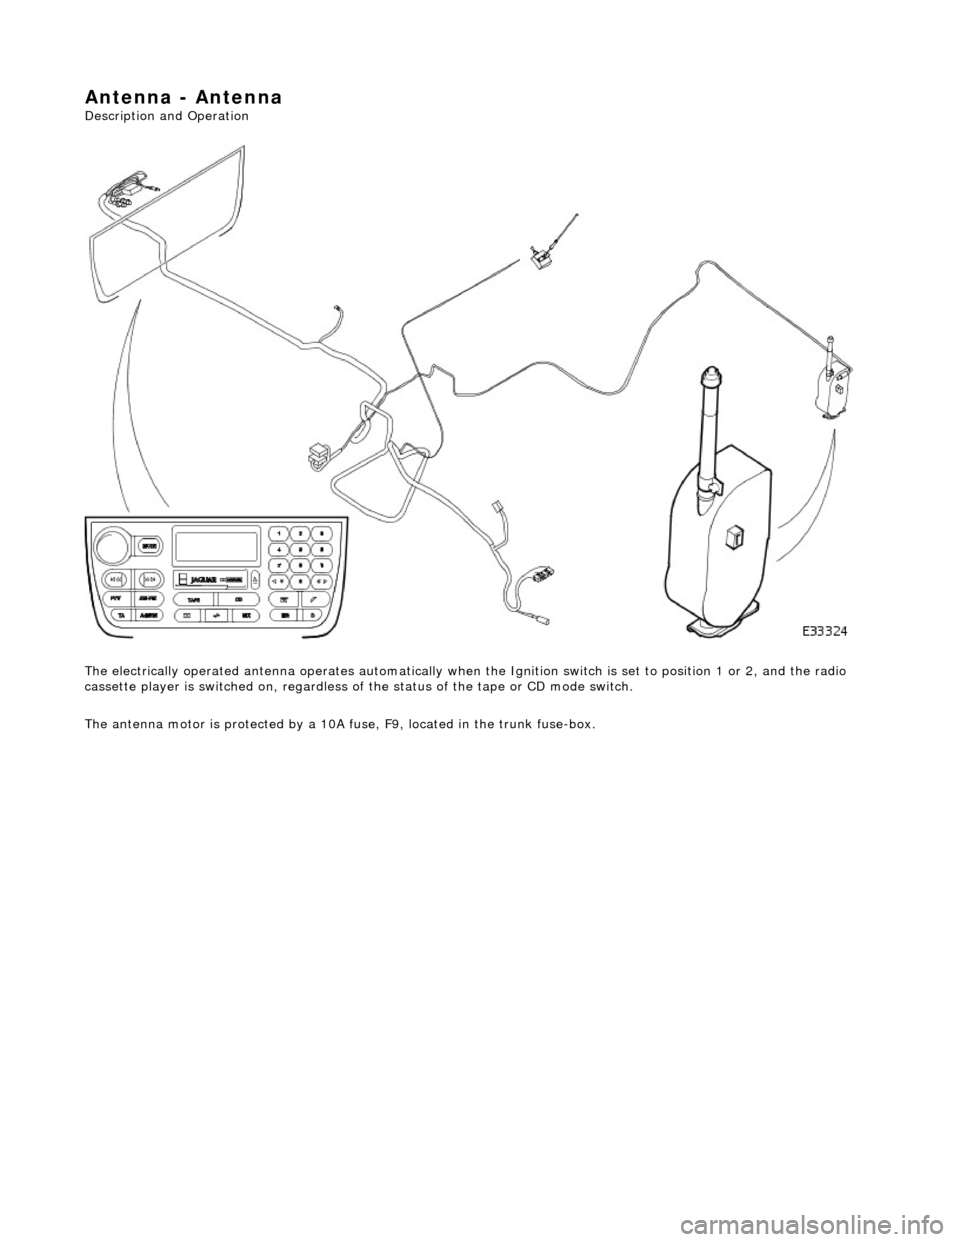 JAGUAR X308 1998 2.G Repair Manual Antenna - Antenna 
Description and Operation  
The electrically operated antenna operates automatically when the Ignition switch is set to position 1 or 2, and the radio 
cassette player is switched o